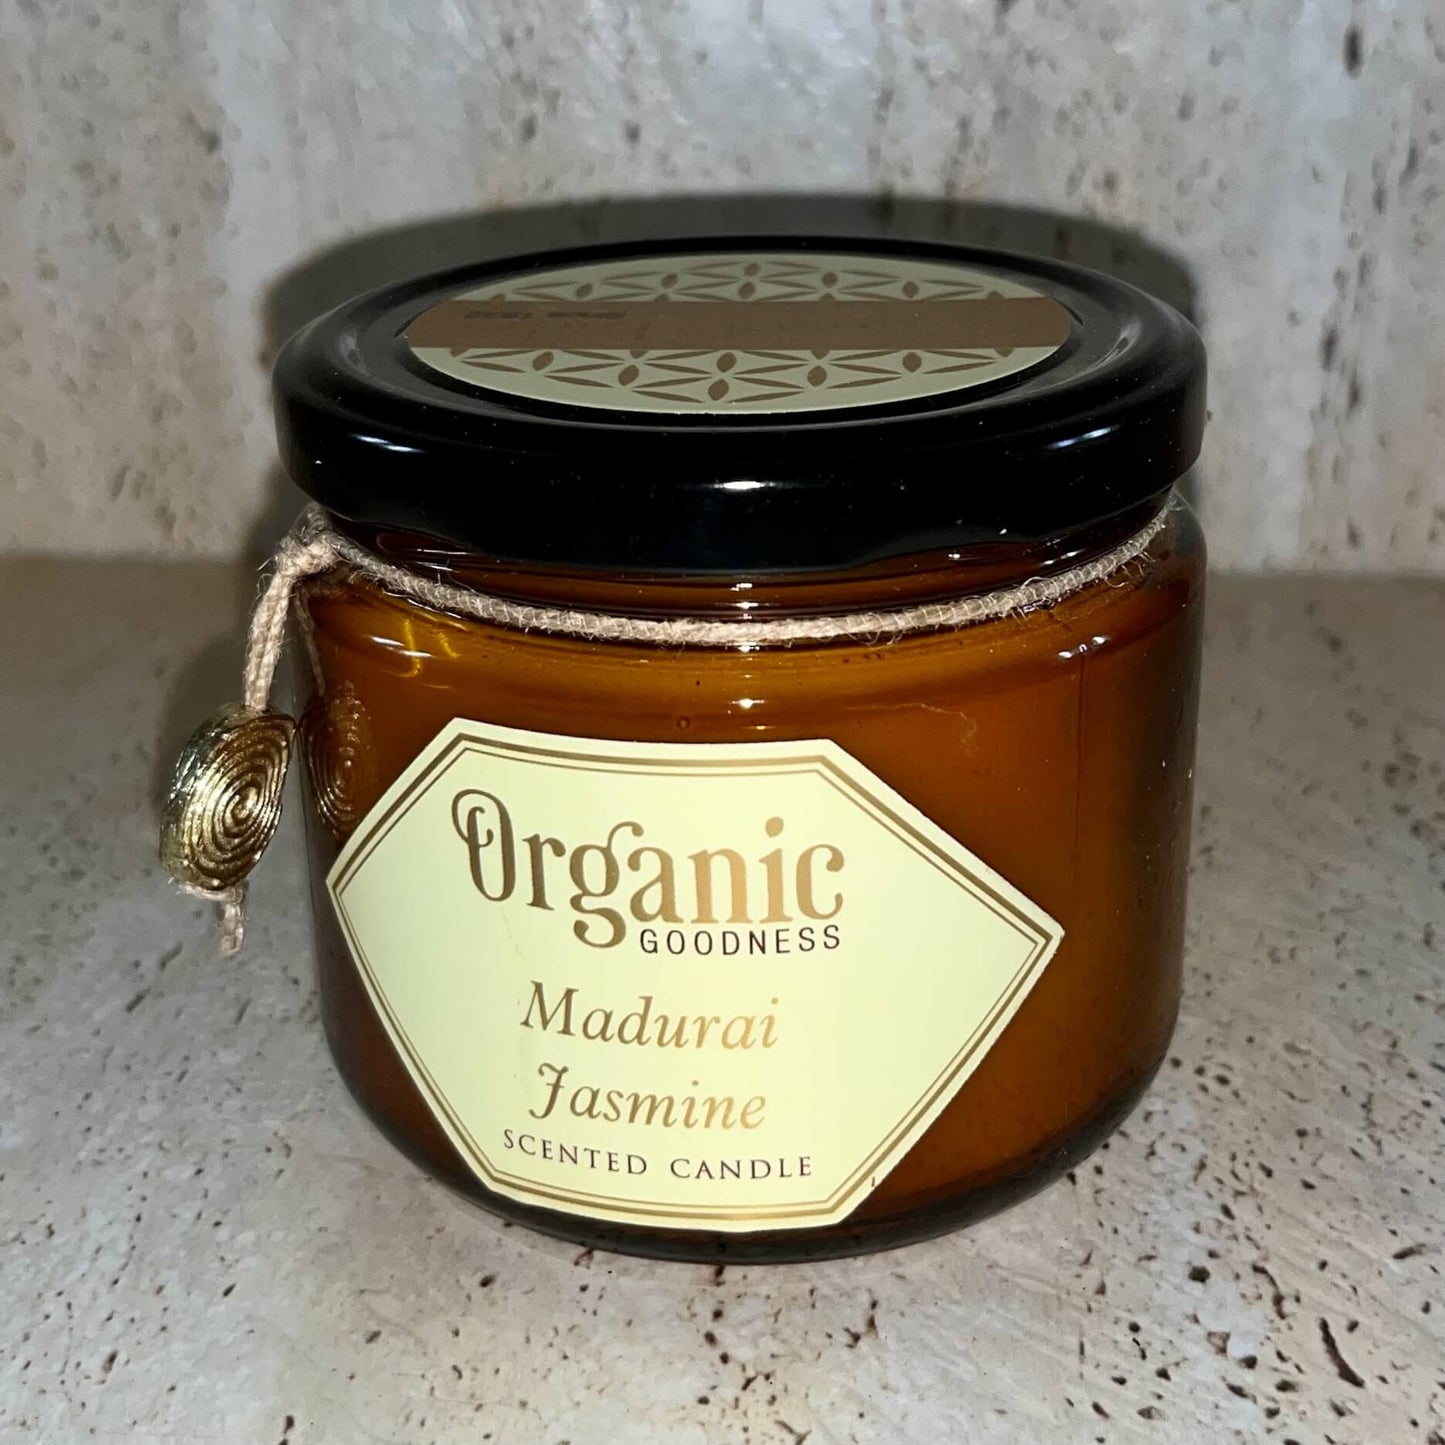 Organic Goodness Soy Candle JASMINE in Amber Glass Jar